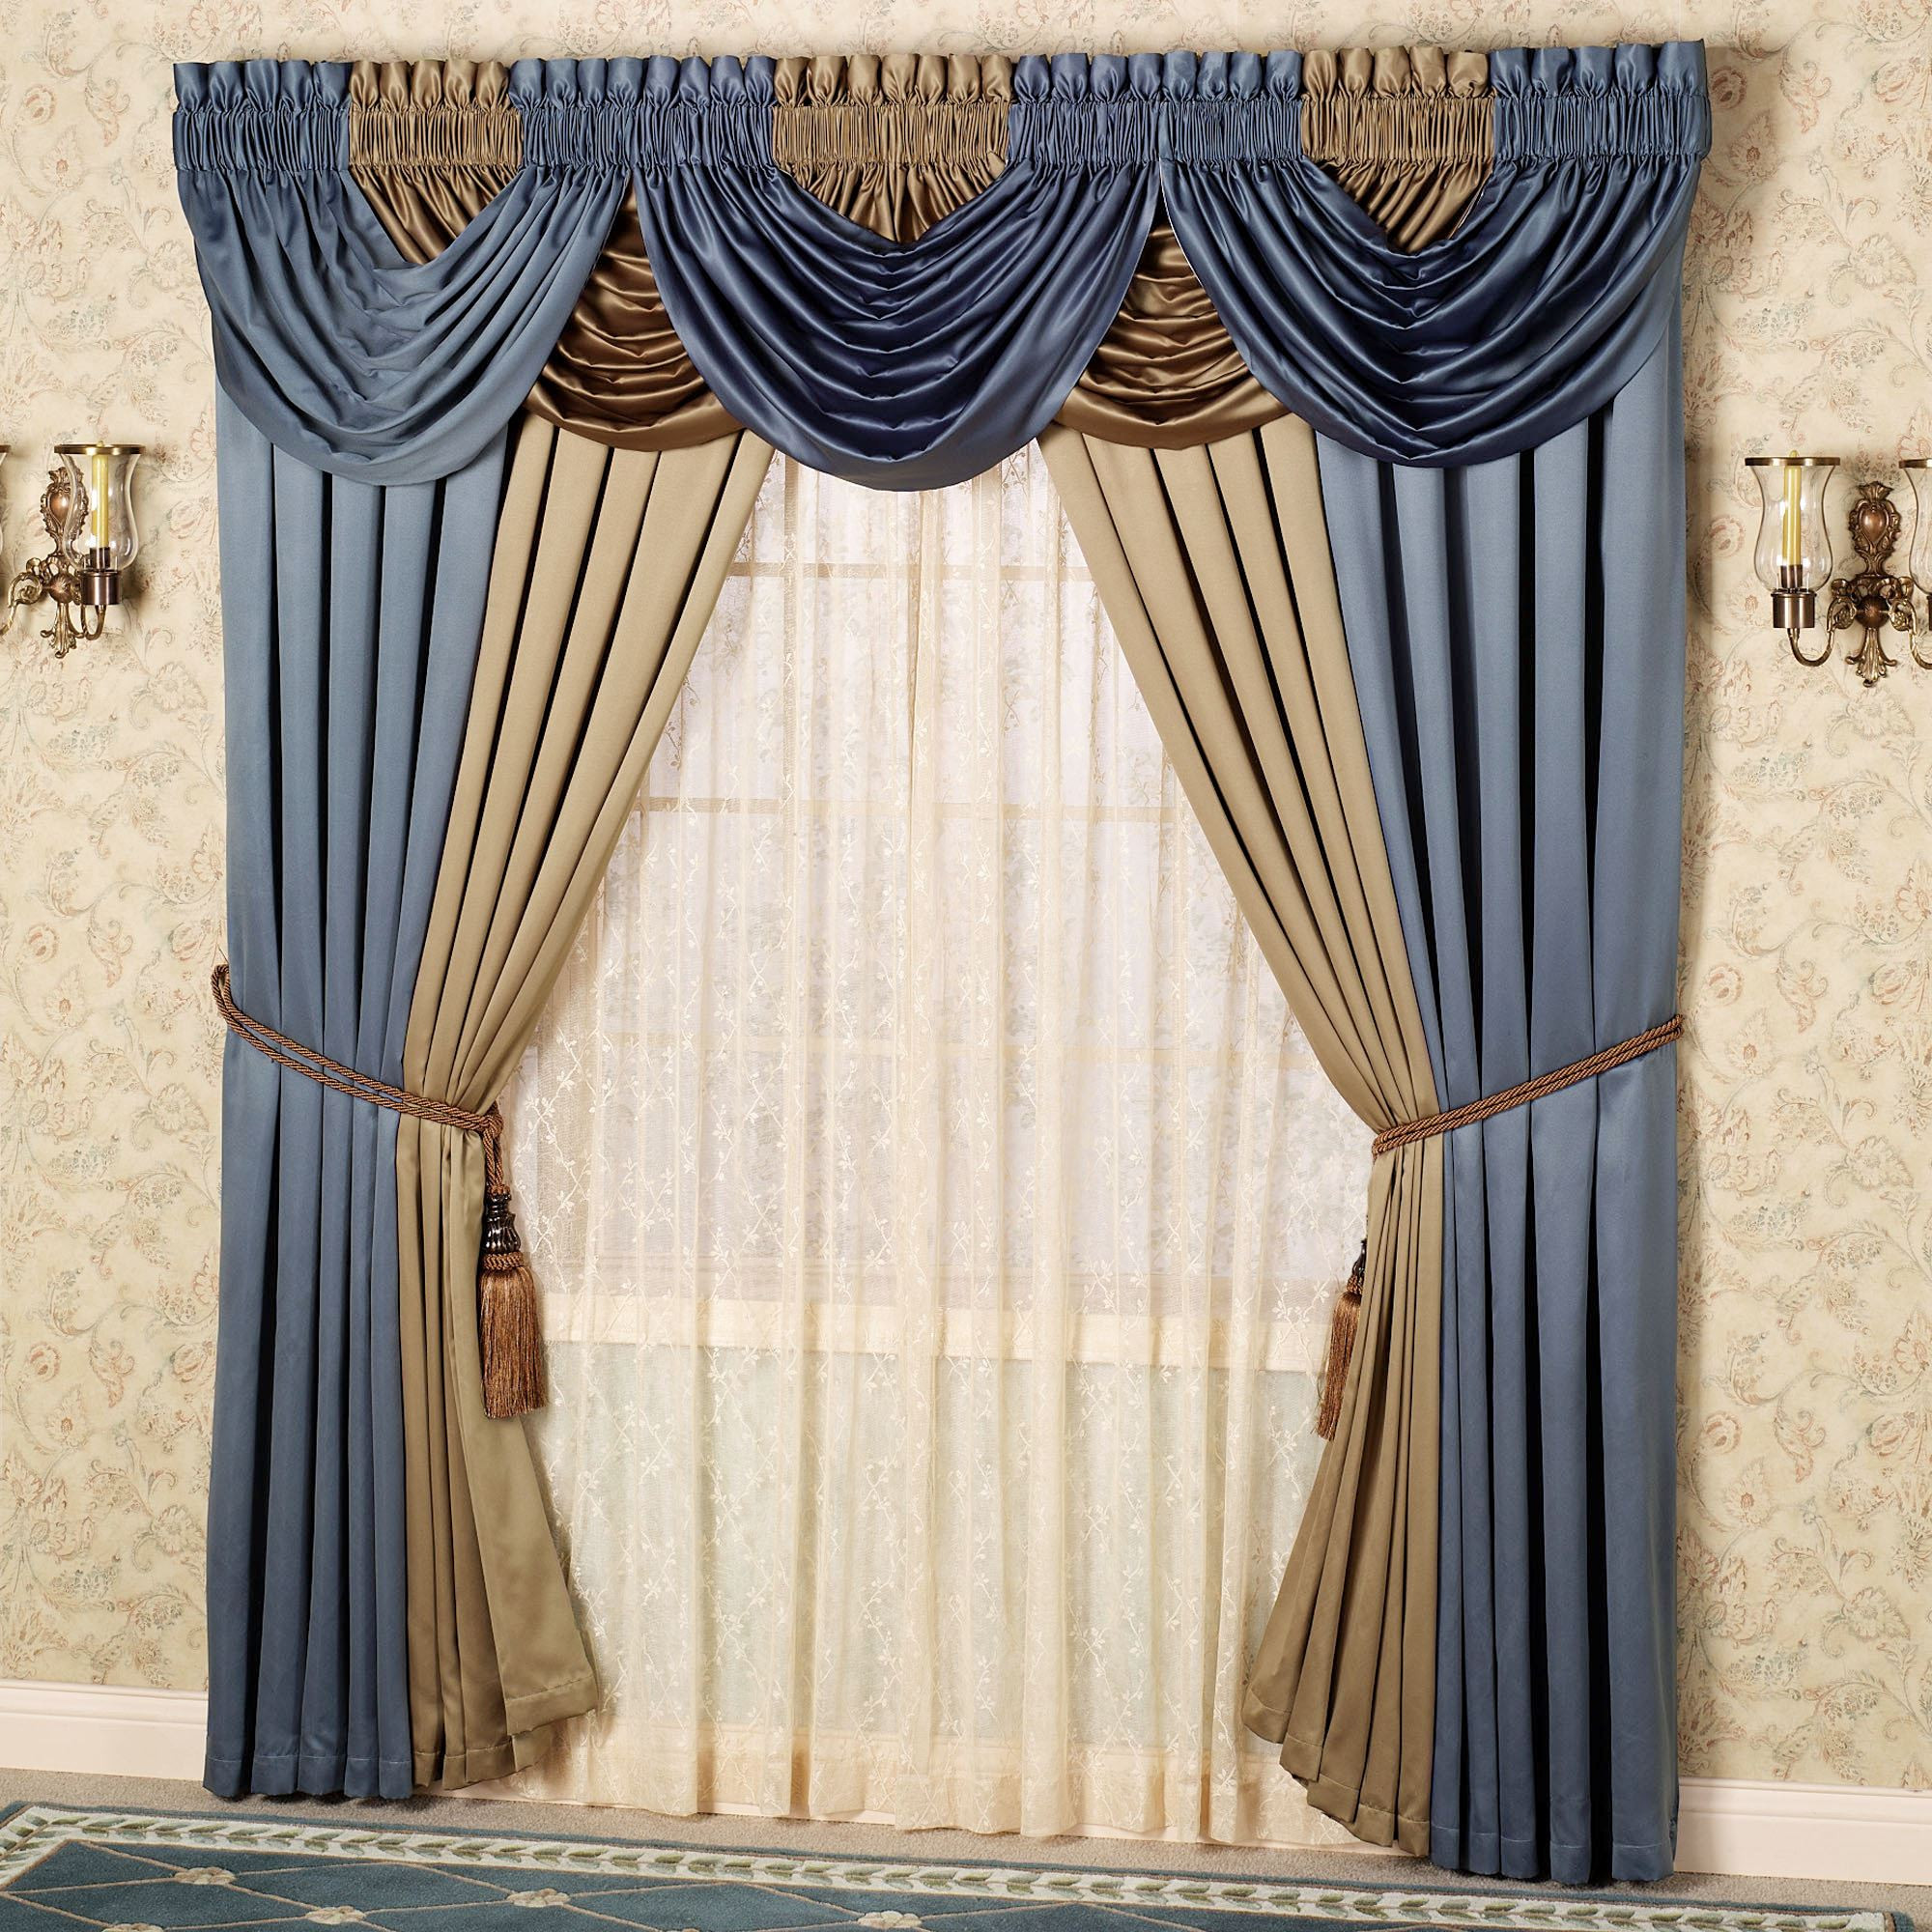 Jcpenney Curtains Kitchen
 Curtain Enchanting Jcpenney Valances Curtains For Window